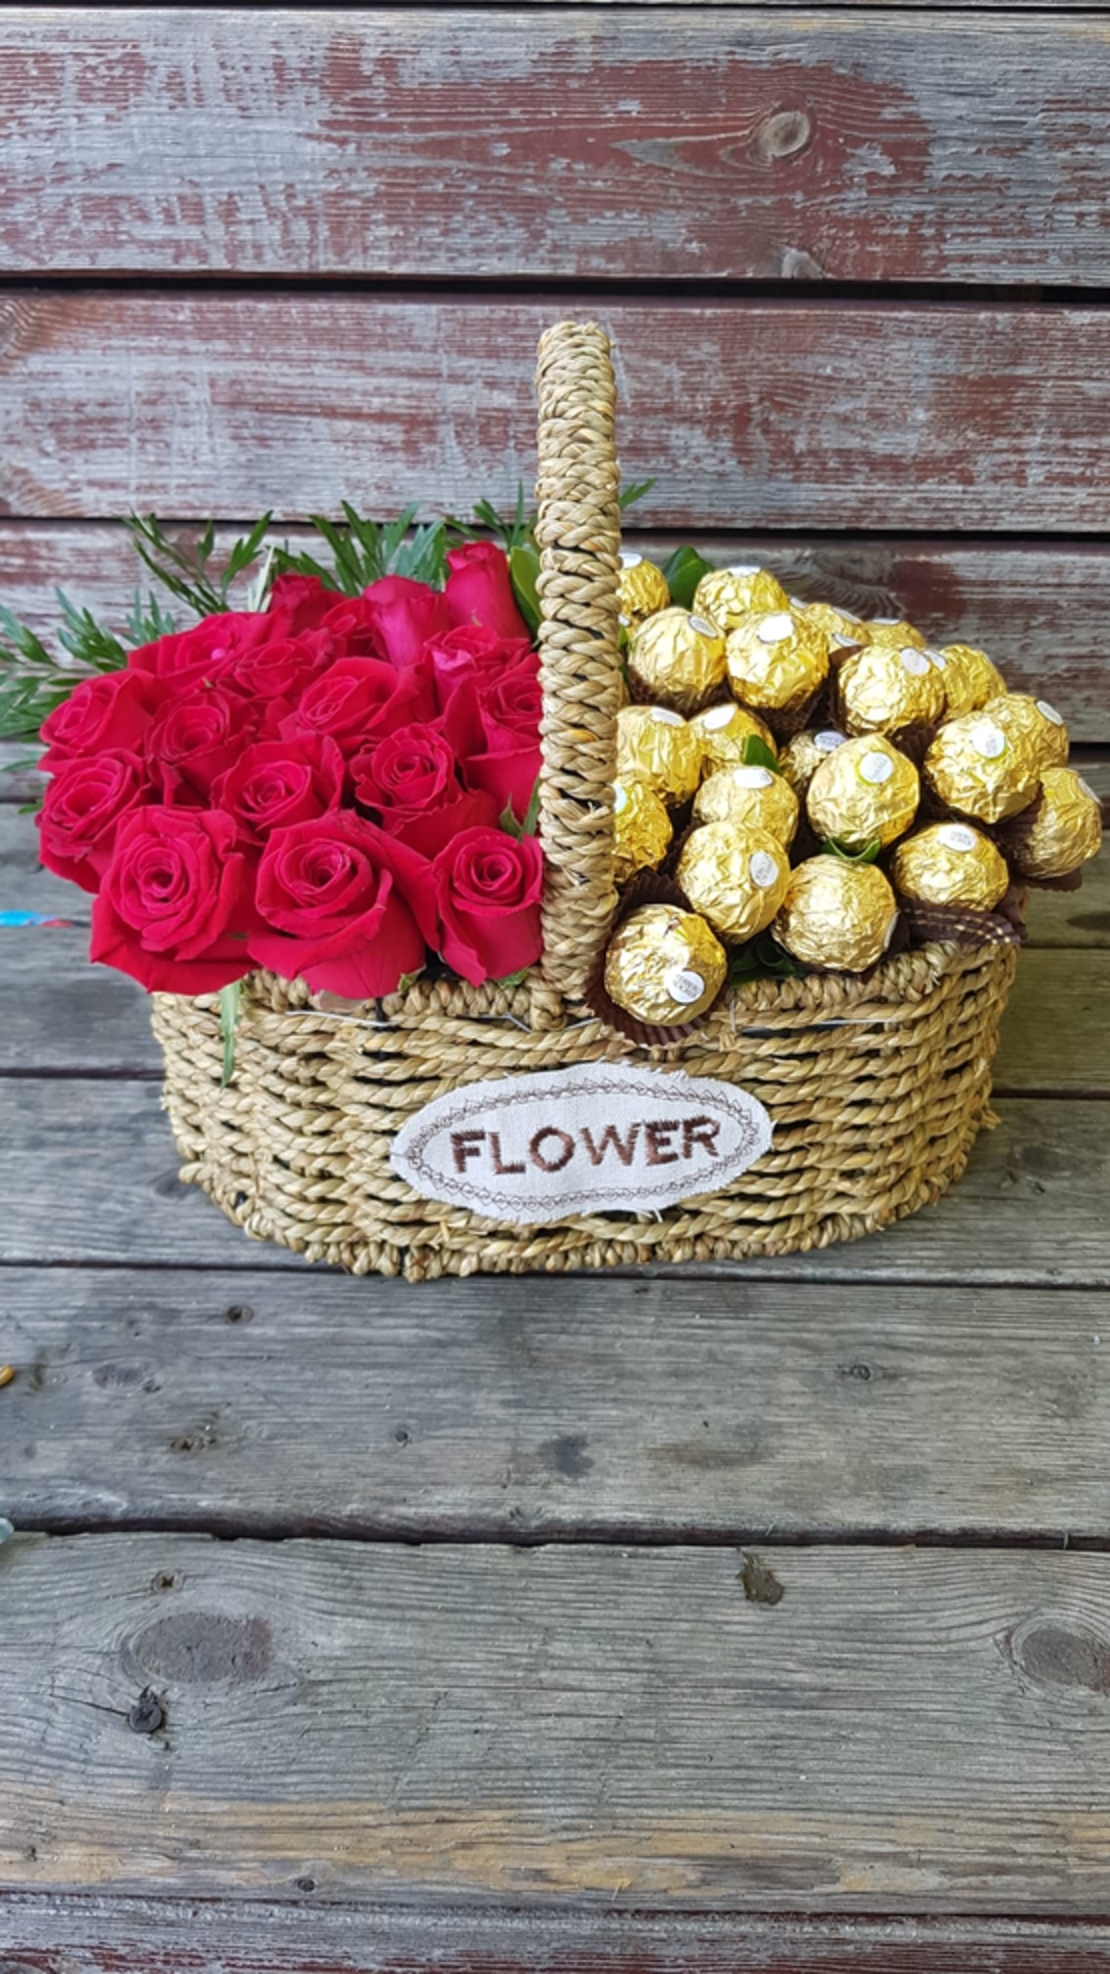 A case of roses and Ferrero Rocher in a basket